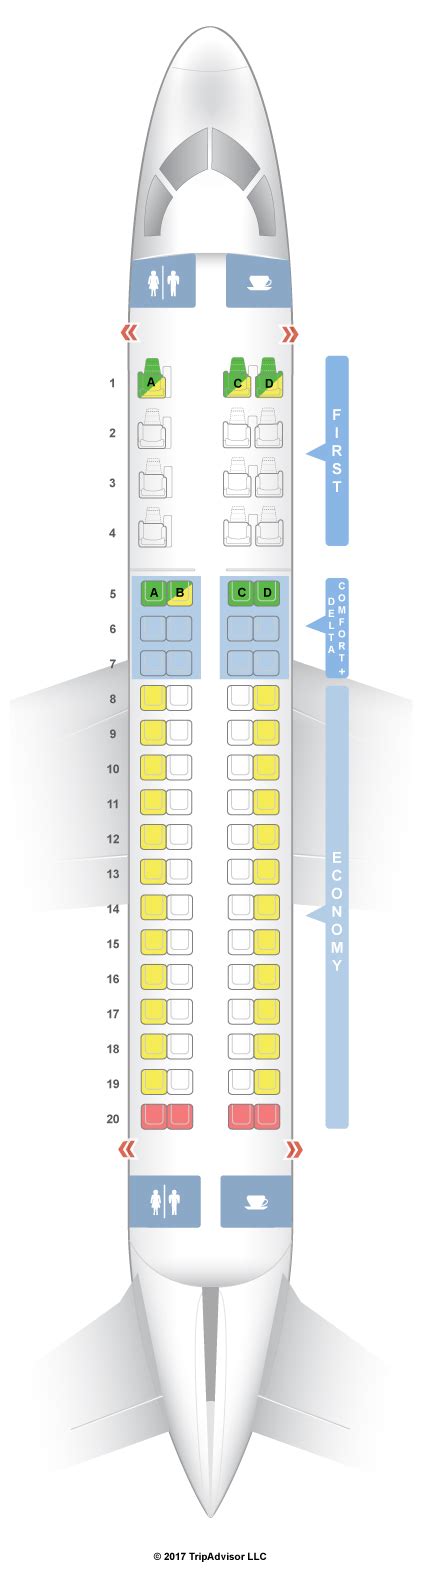 For your next Delta flight, use this seating chart to get the most comfortable seats, legroom, ... Embraer E-175 (E75) Layout 2 - SkyWest; McDonnell Douglas MD-88 (M88) McDonnell Douglas MD-90 (M90) ... my wife in F. Hers was a bit better due to leg room in front. 19 A was truly a mess and much worse than described on SeatGuru. The curvature of ...